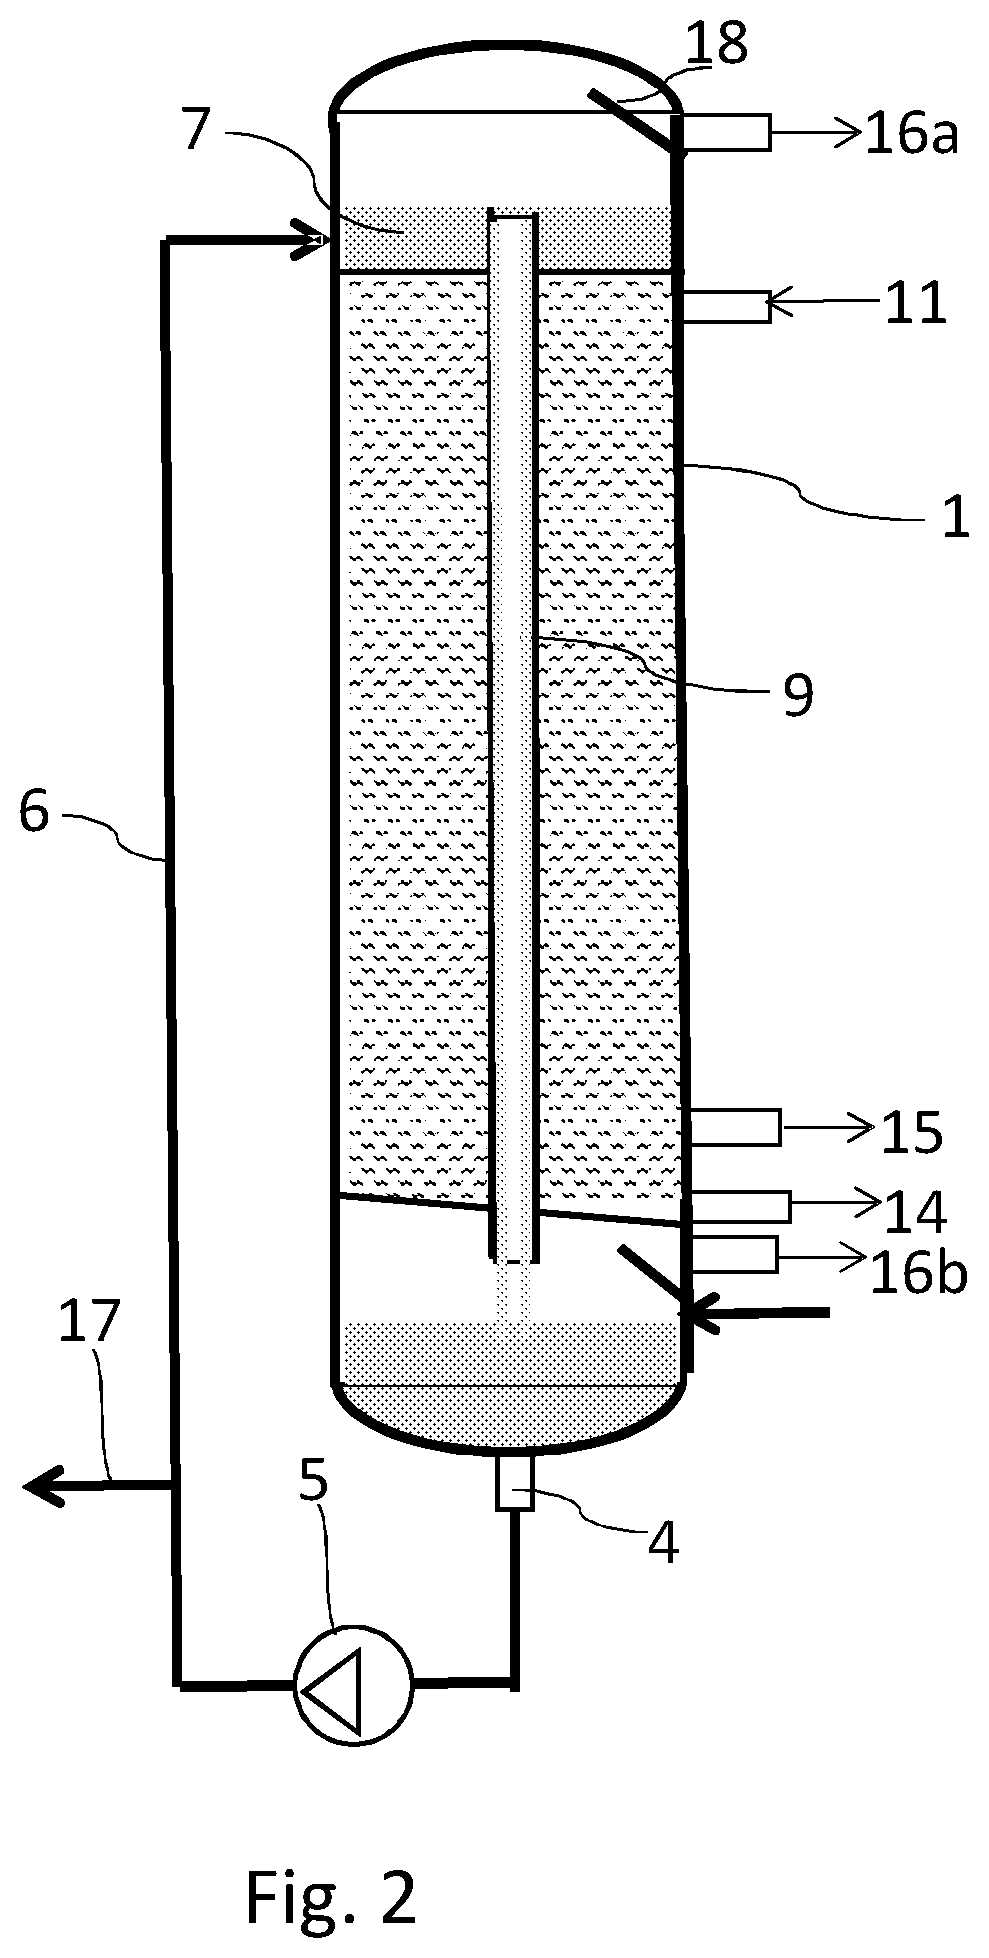 Heat transfer tube and method for manufacturing a heat transfer tube